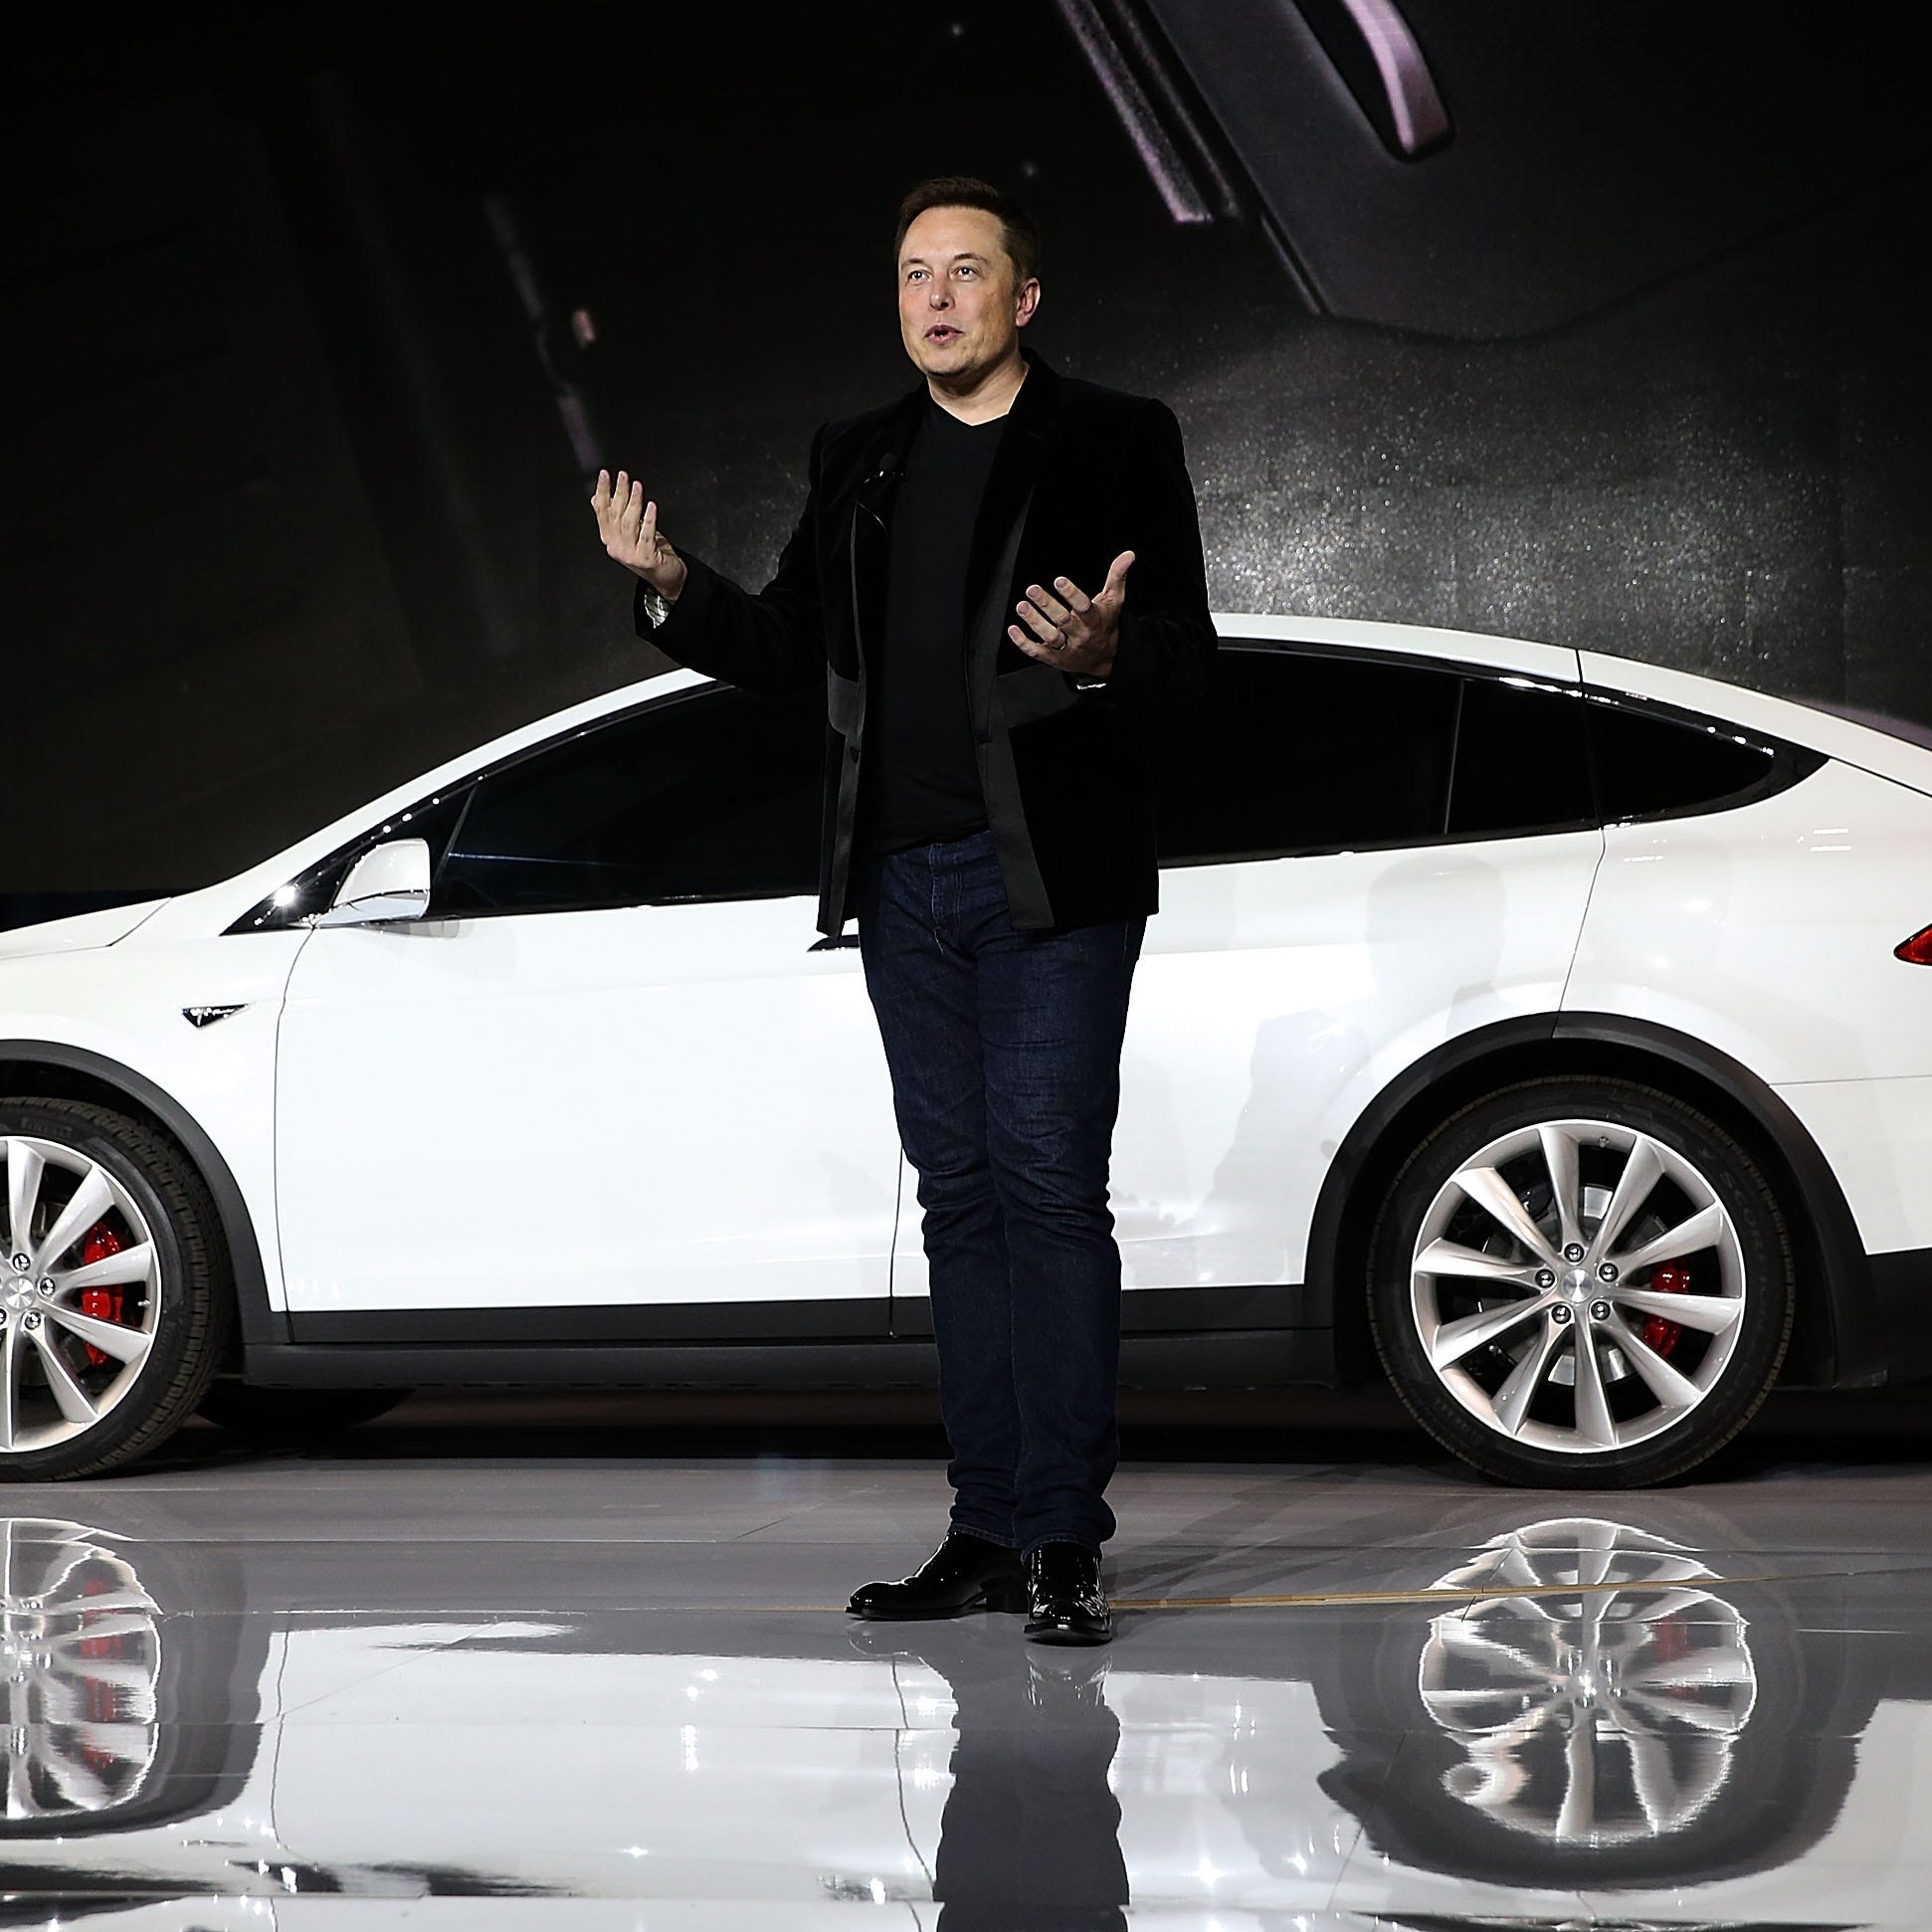 FREMONT, CA - SEPTEMBER 29:  Tesla CEO Elon Musk speaks during an event to launch the new Tesla Model X Crossover SUV on September 29, 2015 in Fremont, California. After several production delays, Elon Musk officially launched the much anticipated Tesla Model X Crossover SUV. The  (Photo by Justin Sullivan/Getty Images) ORG XMIT: 581726041 ORIG FILE ID: 490597722